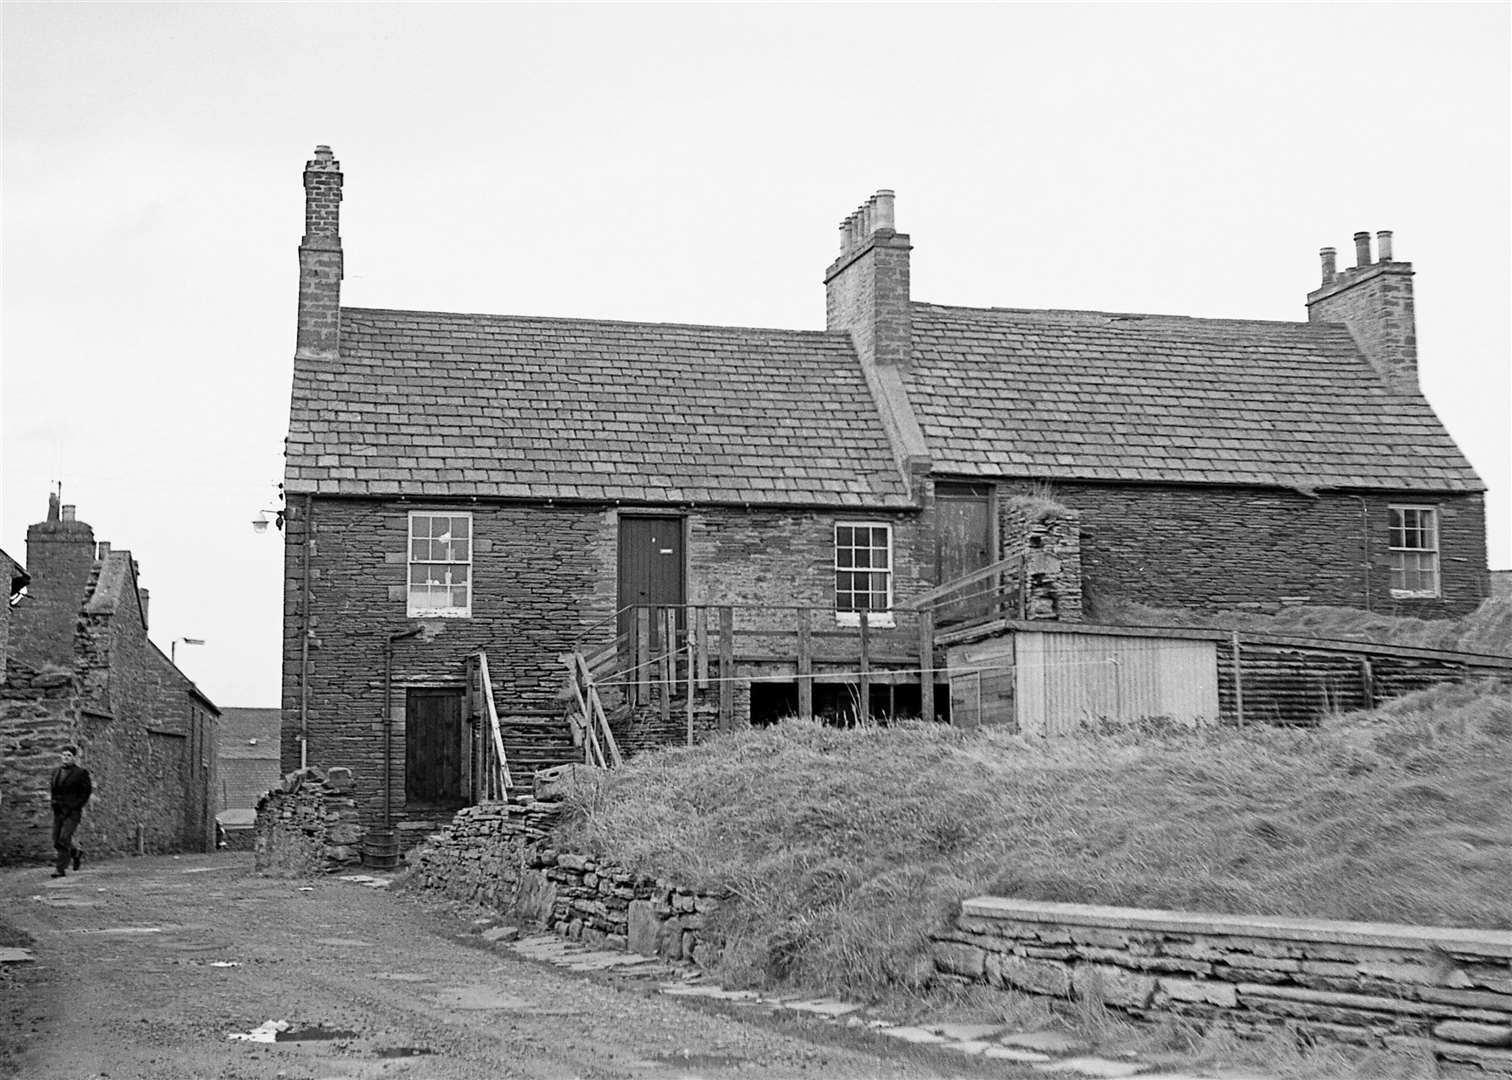 Back Shore Street, Thurso, where the well-known local character Peggy Sue and her sister Dinah once lived. Their brother David was a fatality of the Titanic. Old St Peter’s Kirk stands at the other side of these houses. Jack Selby Collection / Thurso Heritage Society